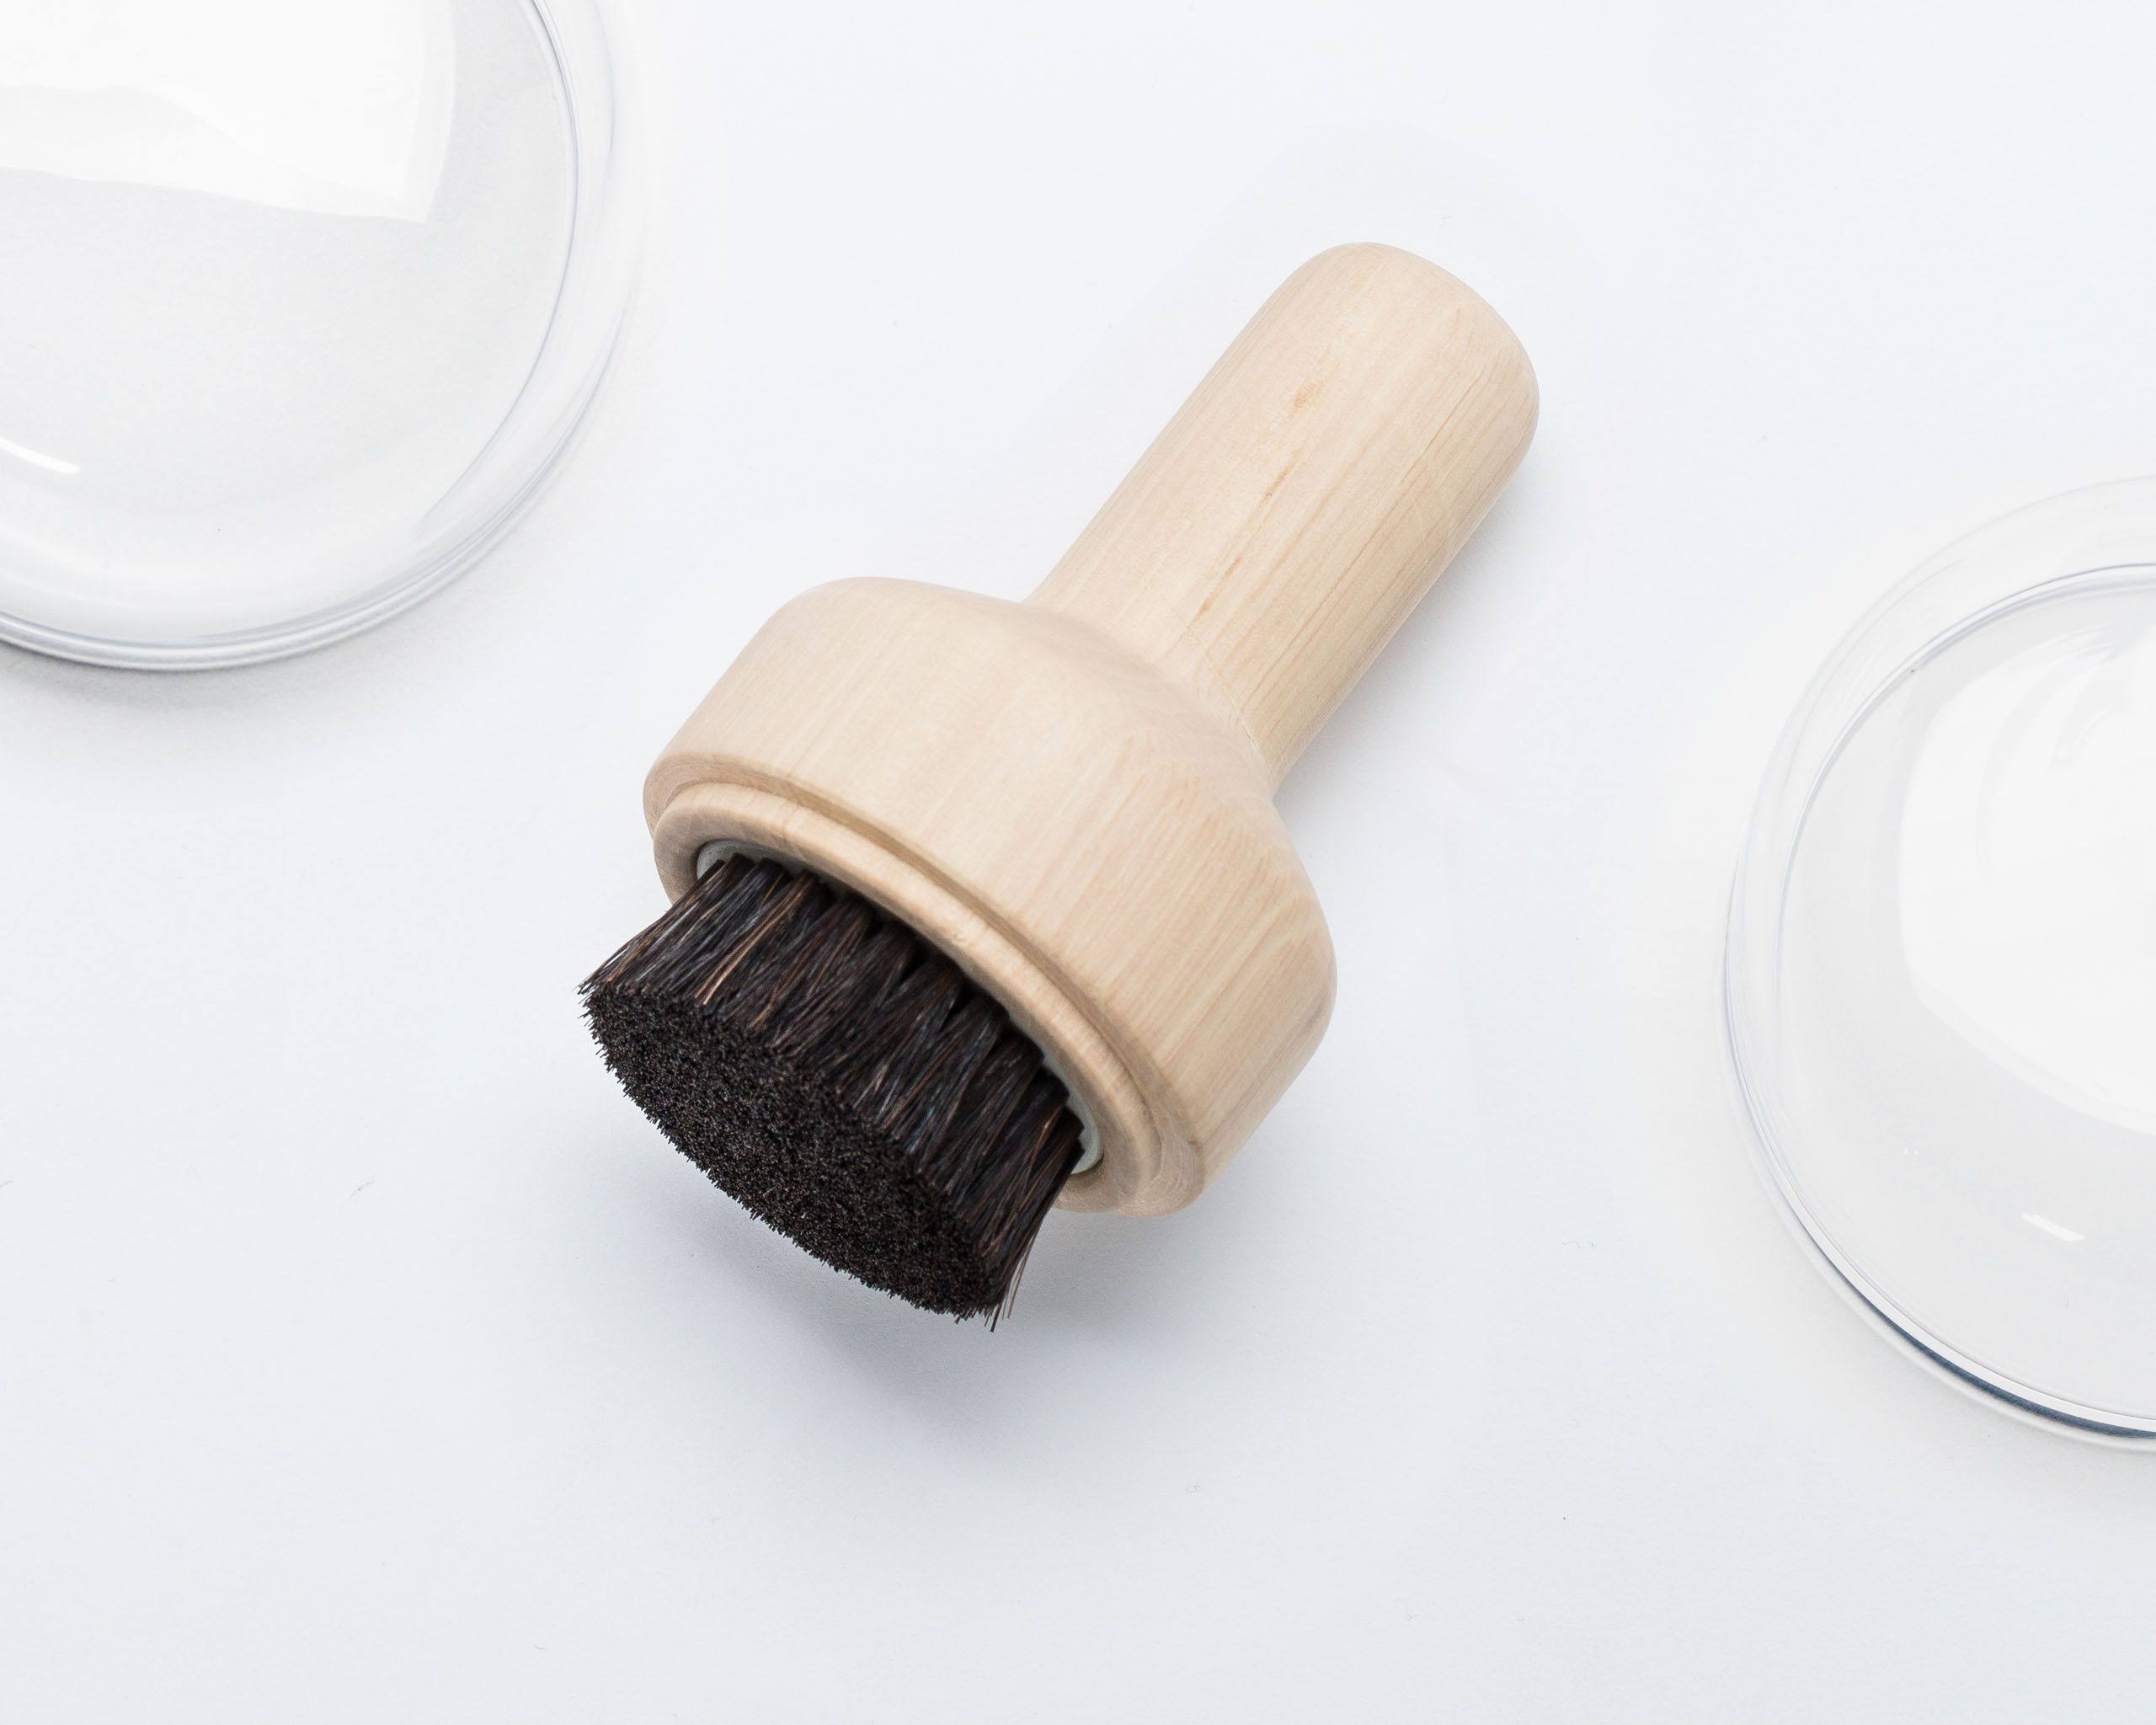 A shoe brush made of wood and natural bristles with an extended handle.